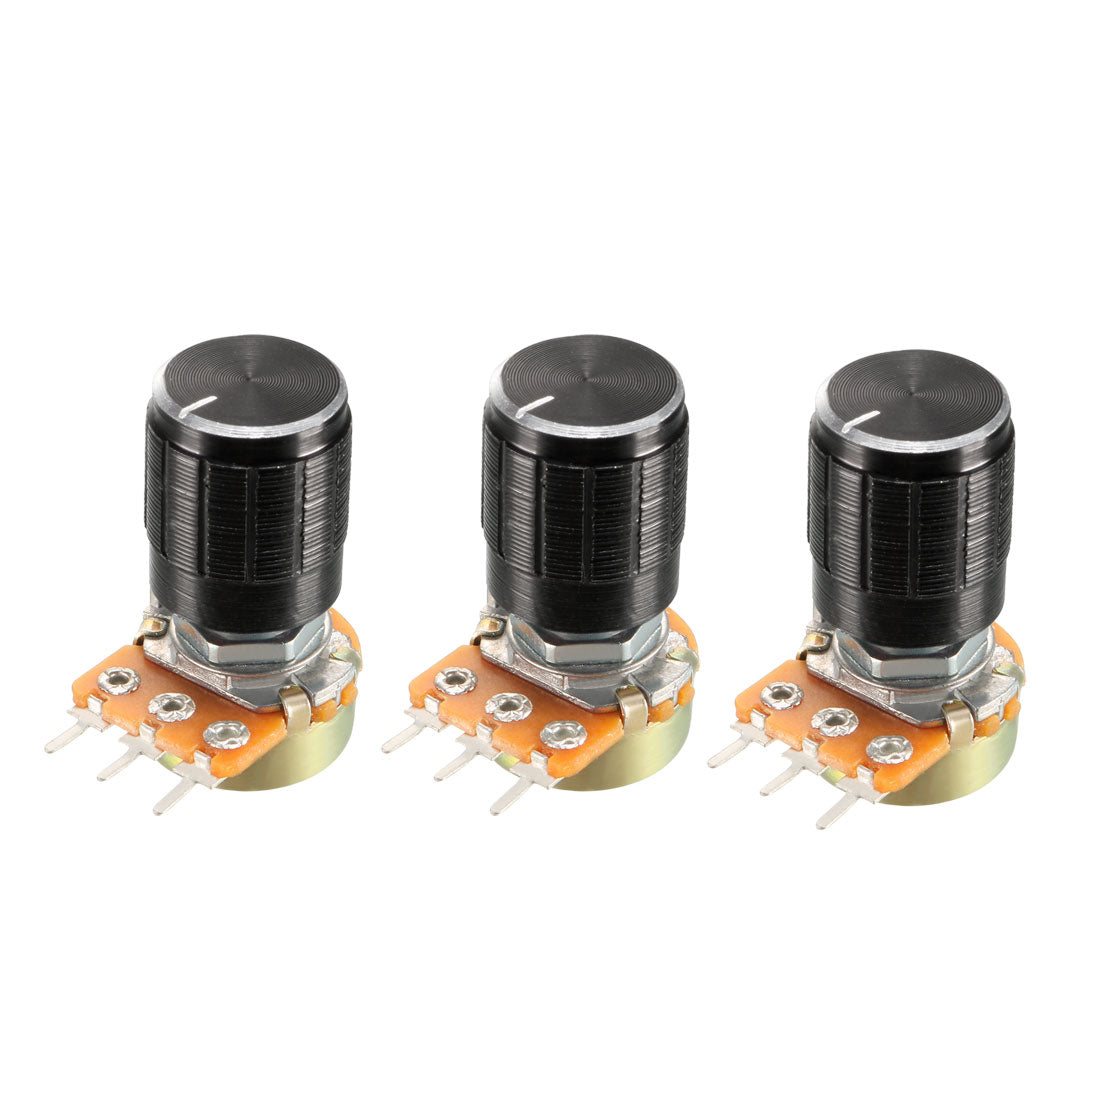 uxcell Uxcell WH148 3Pcs 1K Ohm Variable Resistors Single Turn Rotary Carbon Film Taper Potentiometer with Knob